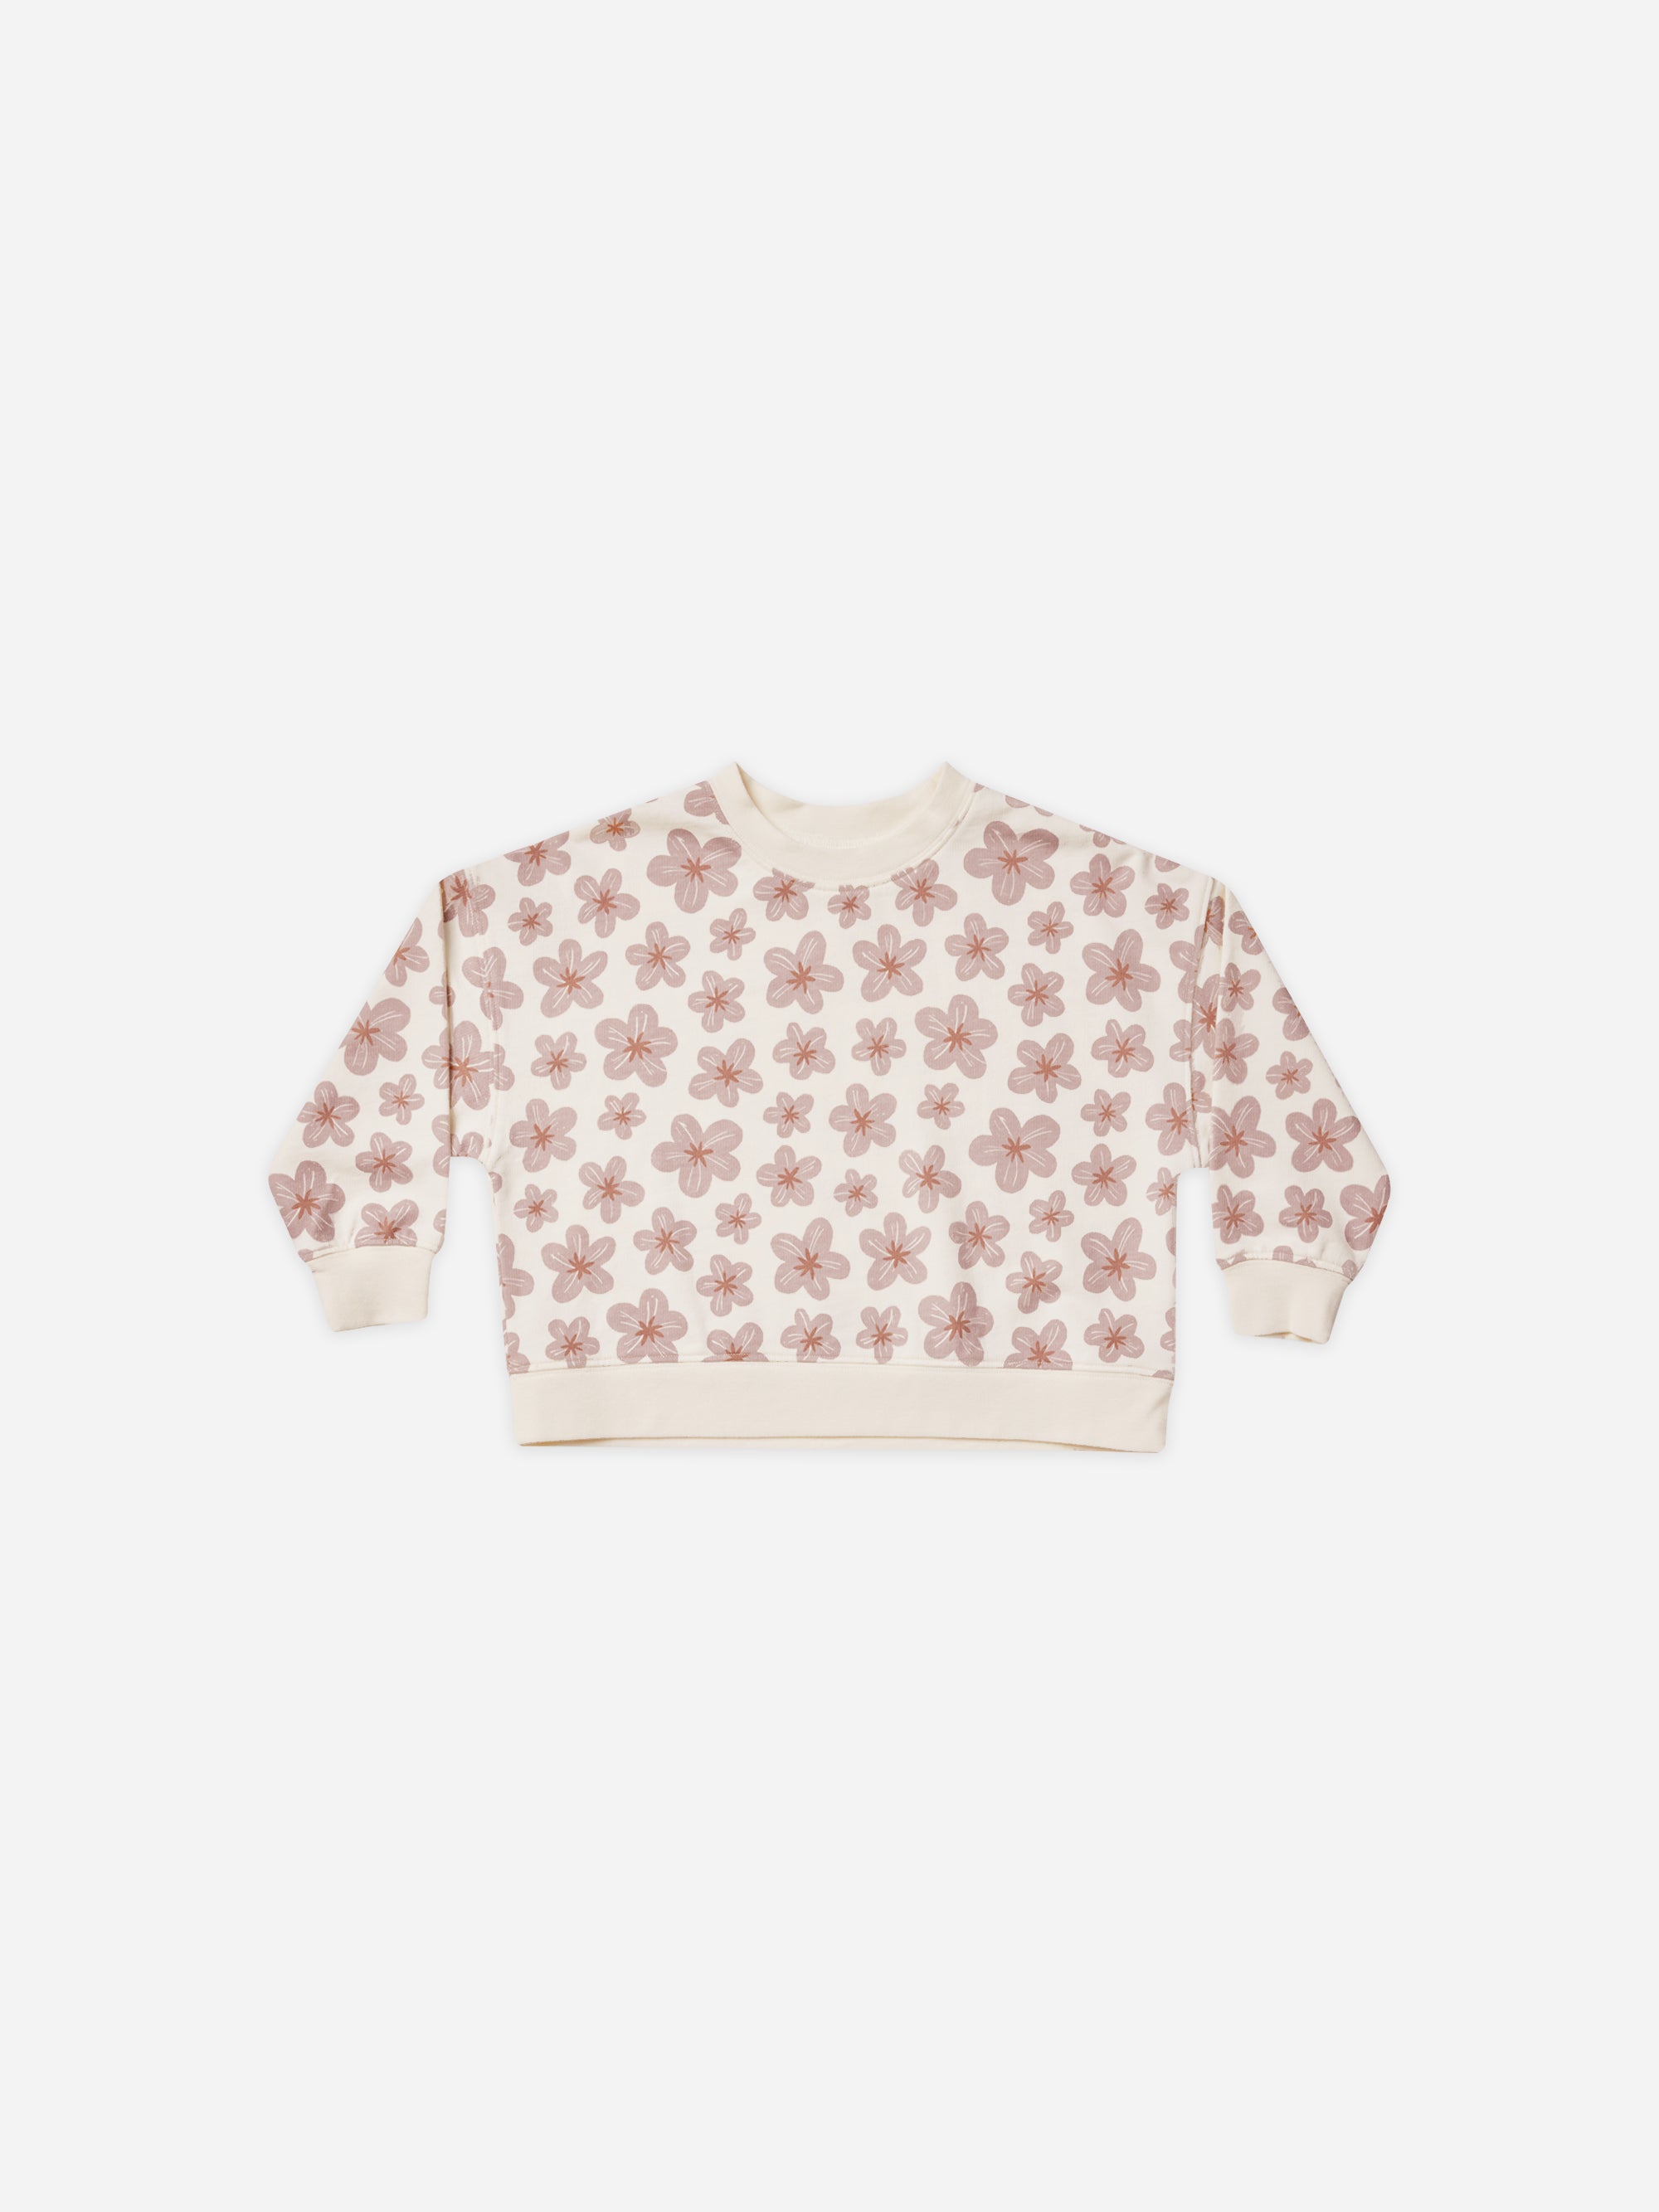 Boxy Pullover || Hibiscus - Rylee + Cru | Kids Clothes | Trendy Baby Clothes | Modern Infant Outfits |